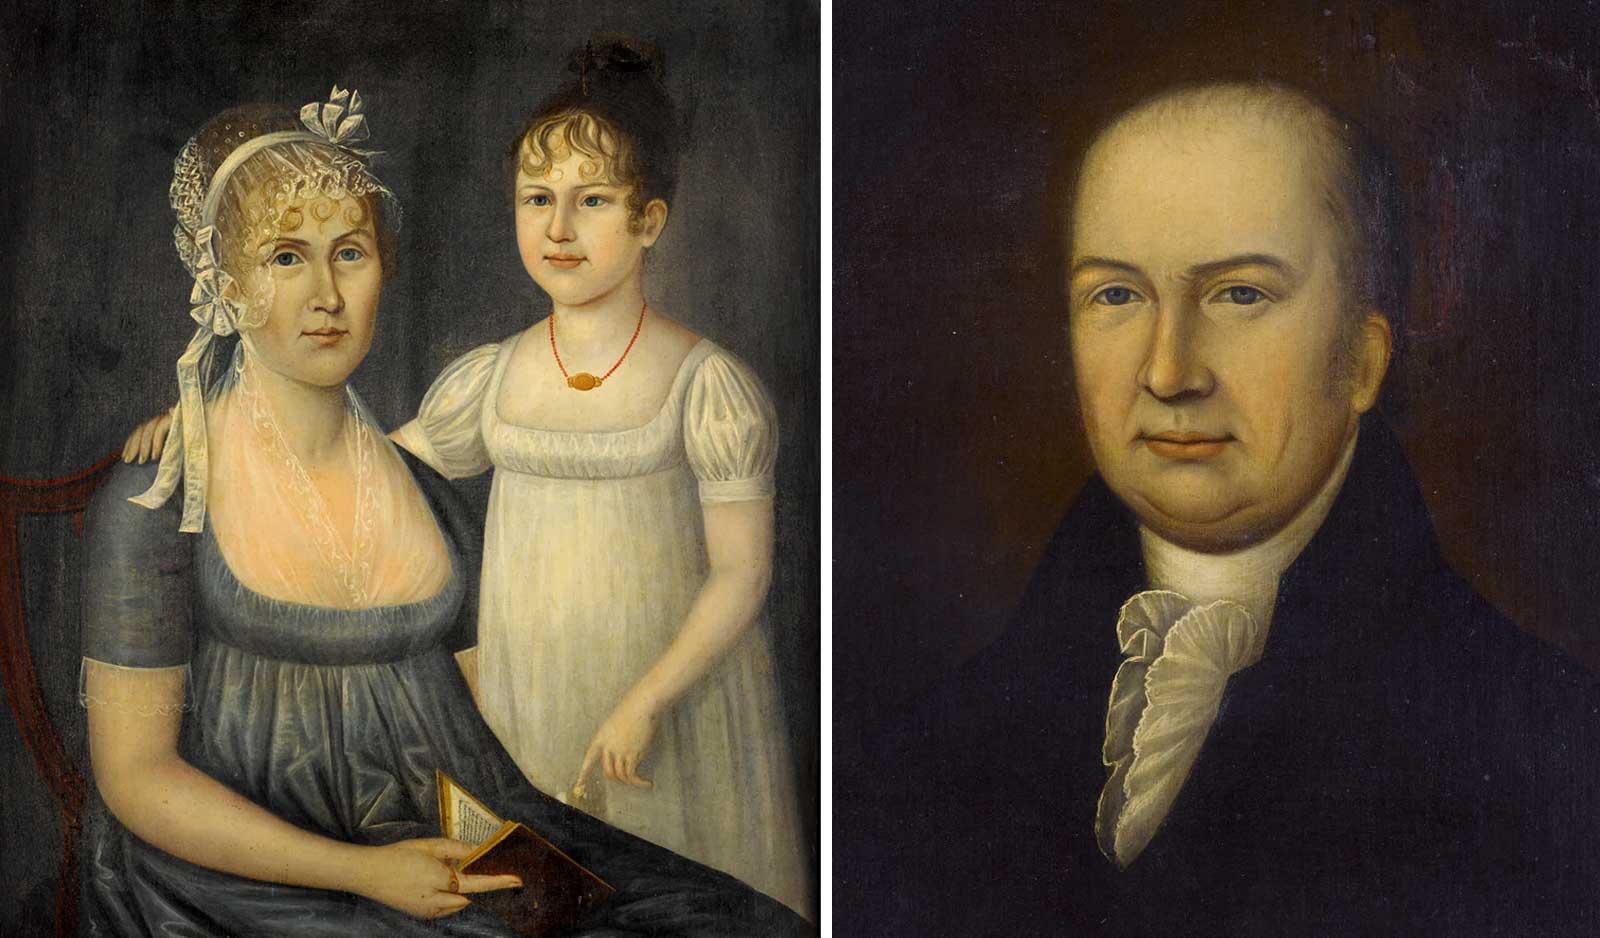 Dr. Andrew Aitkin (1757-1809), Mrs. Andrew Aitkin (Elizabeth Aiken, 1761-1811) and her daughter, Eliza Aitkin (1798-1885),